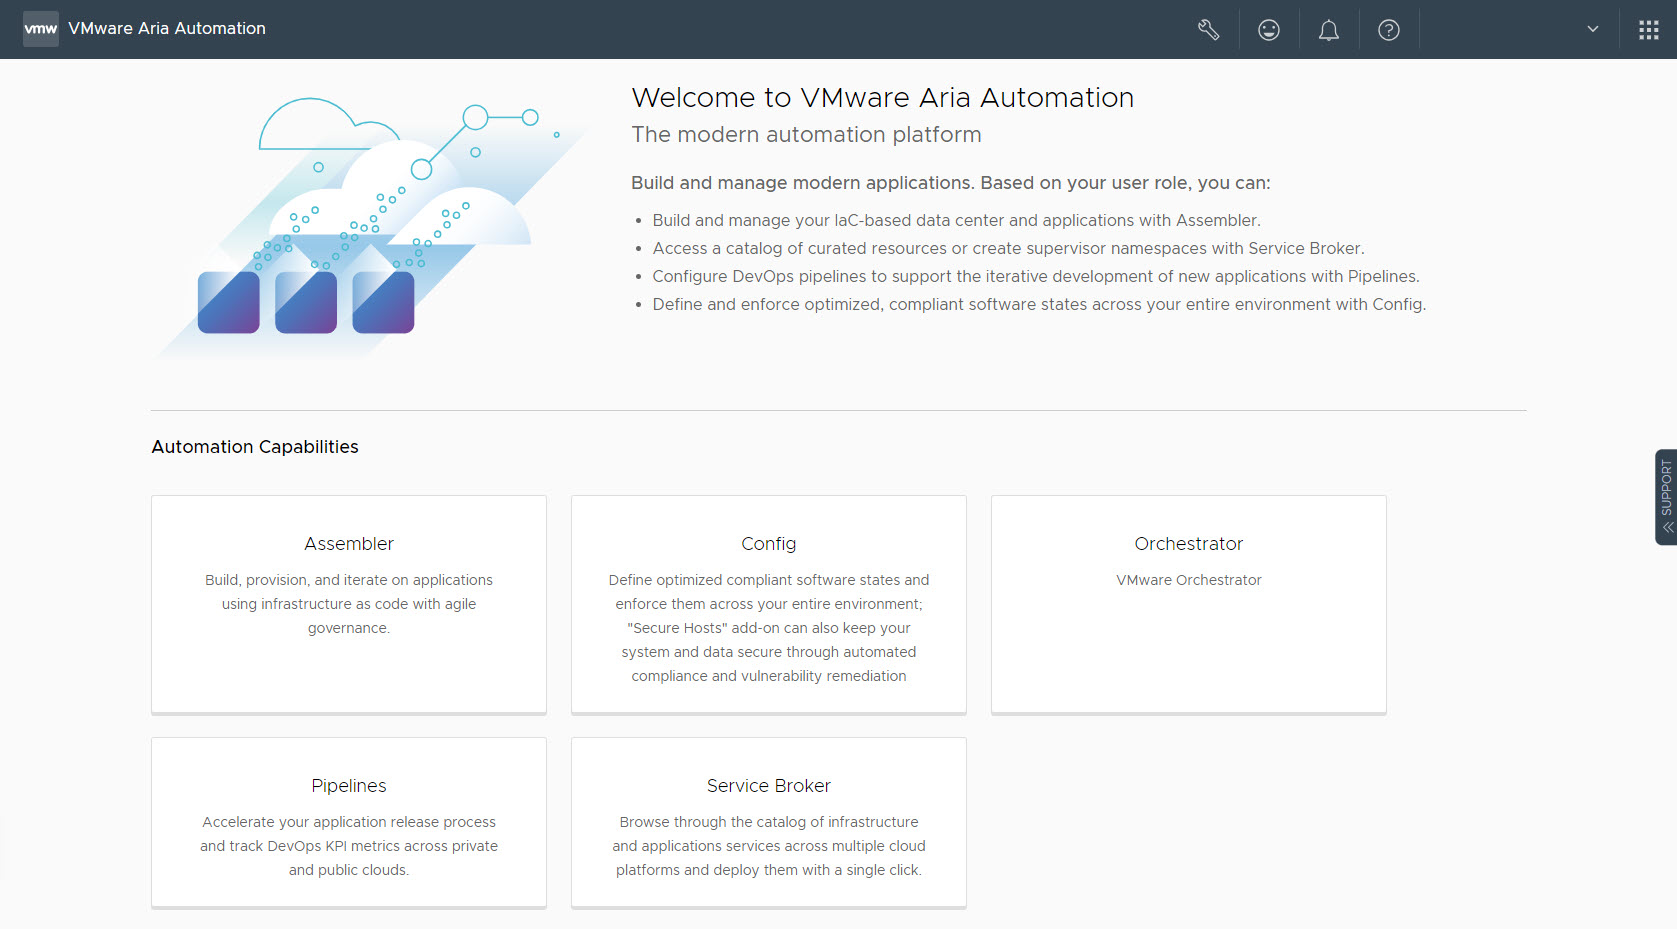 VMware Aria Automation landing page.